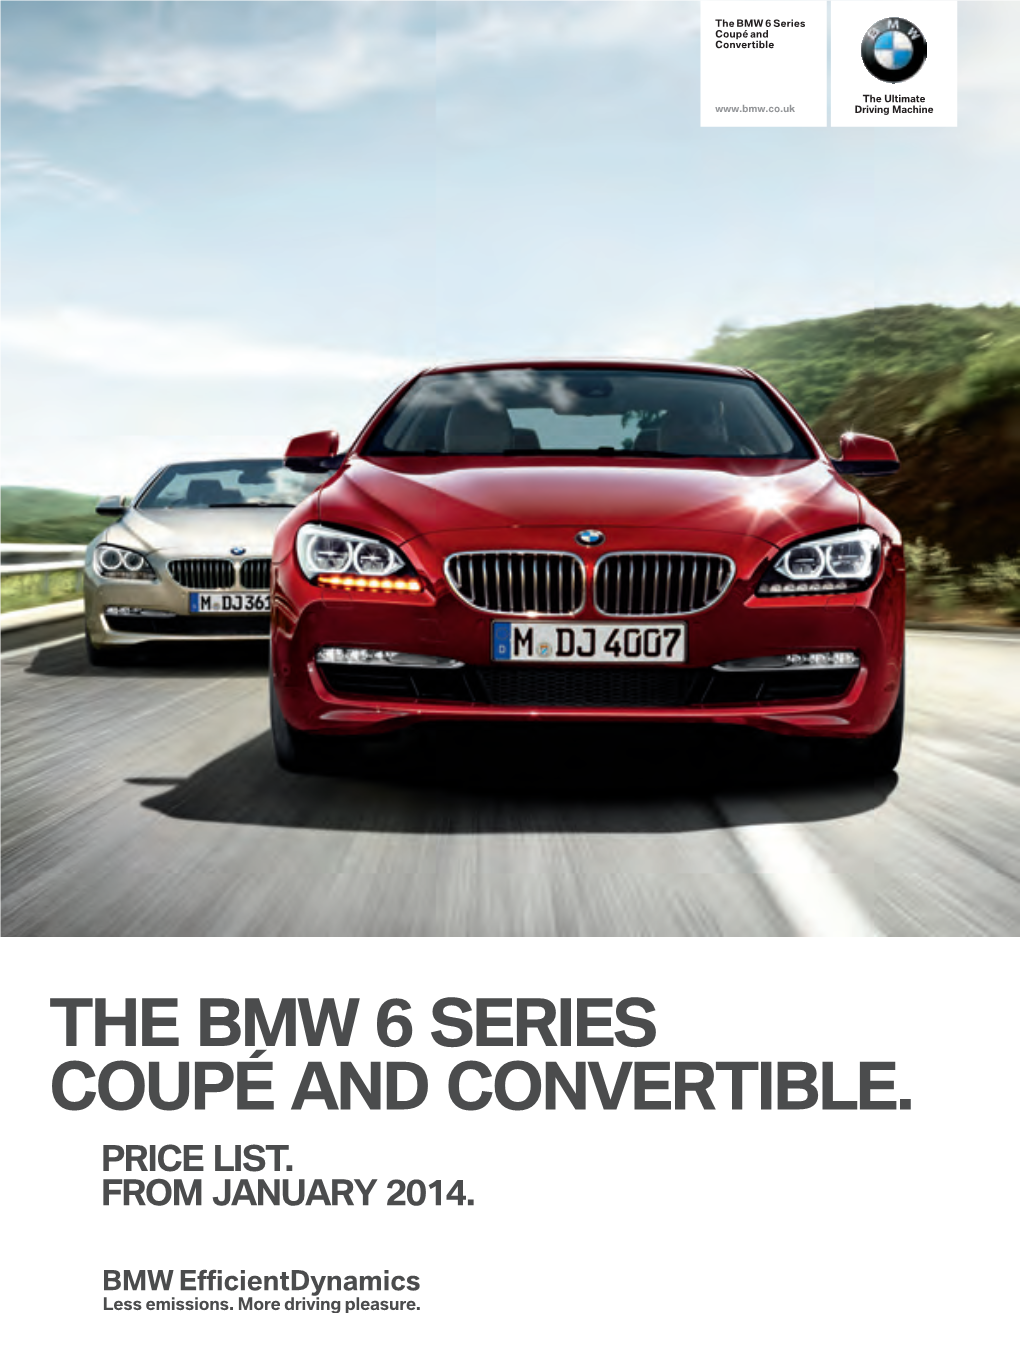 The Bmw 6 Series Coupé and Convertible. Price List